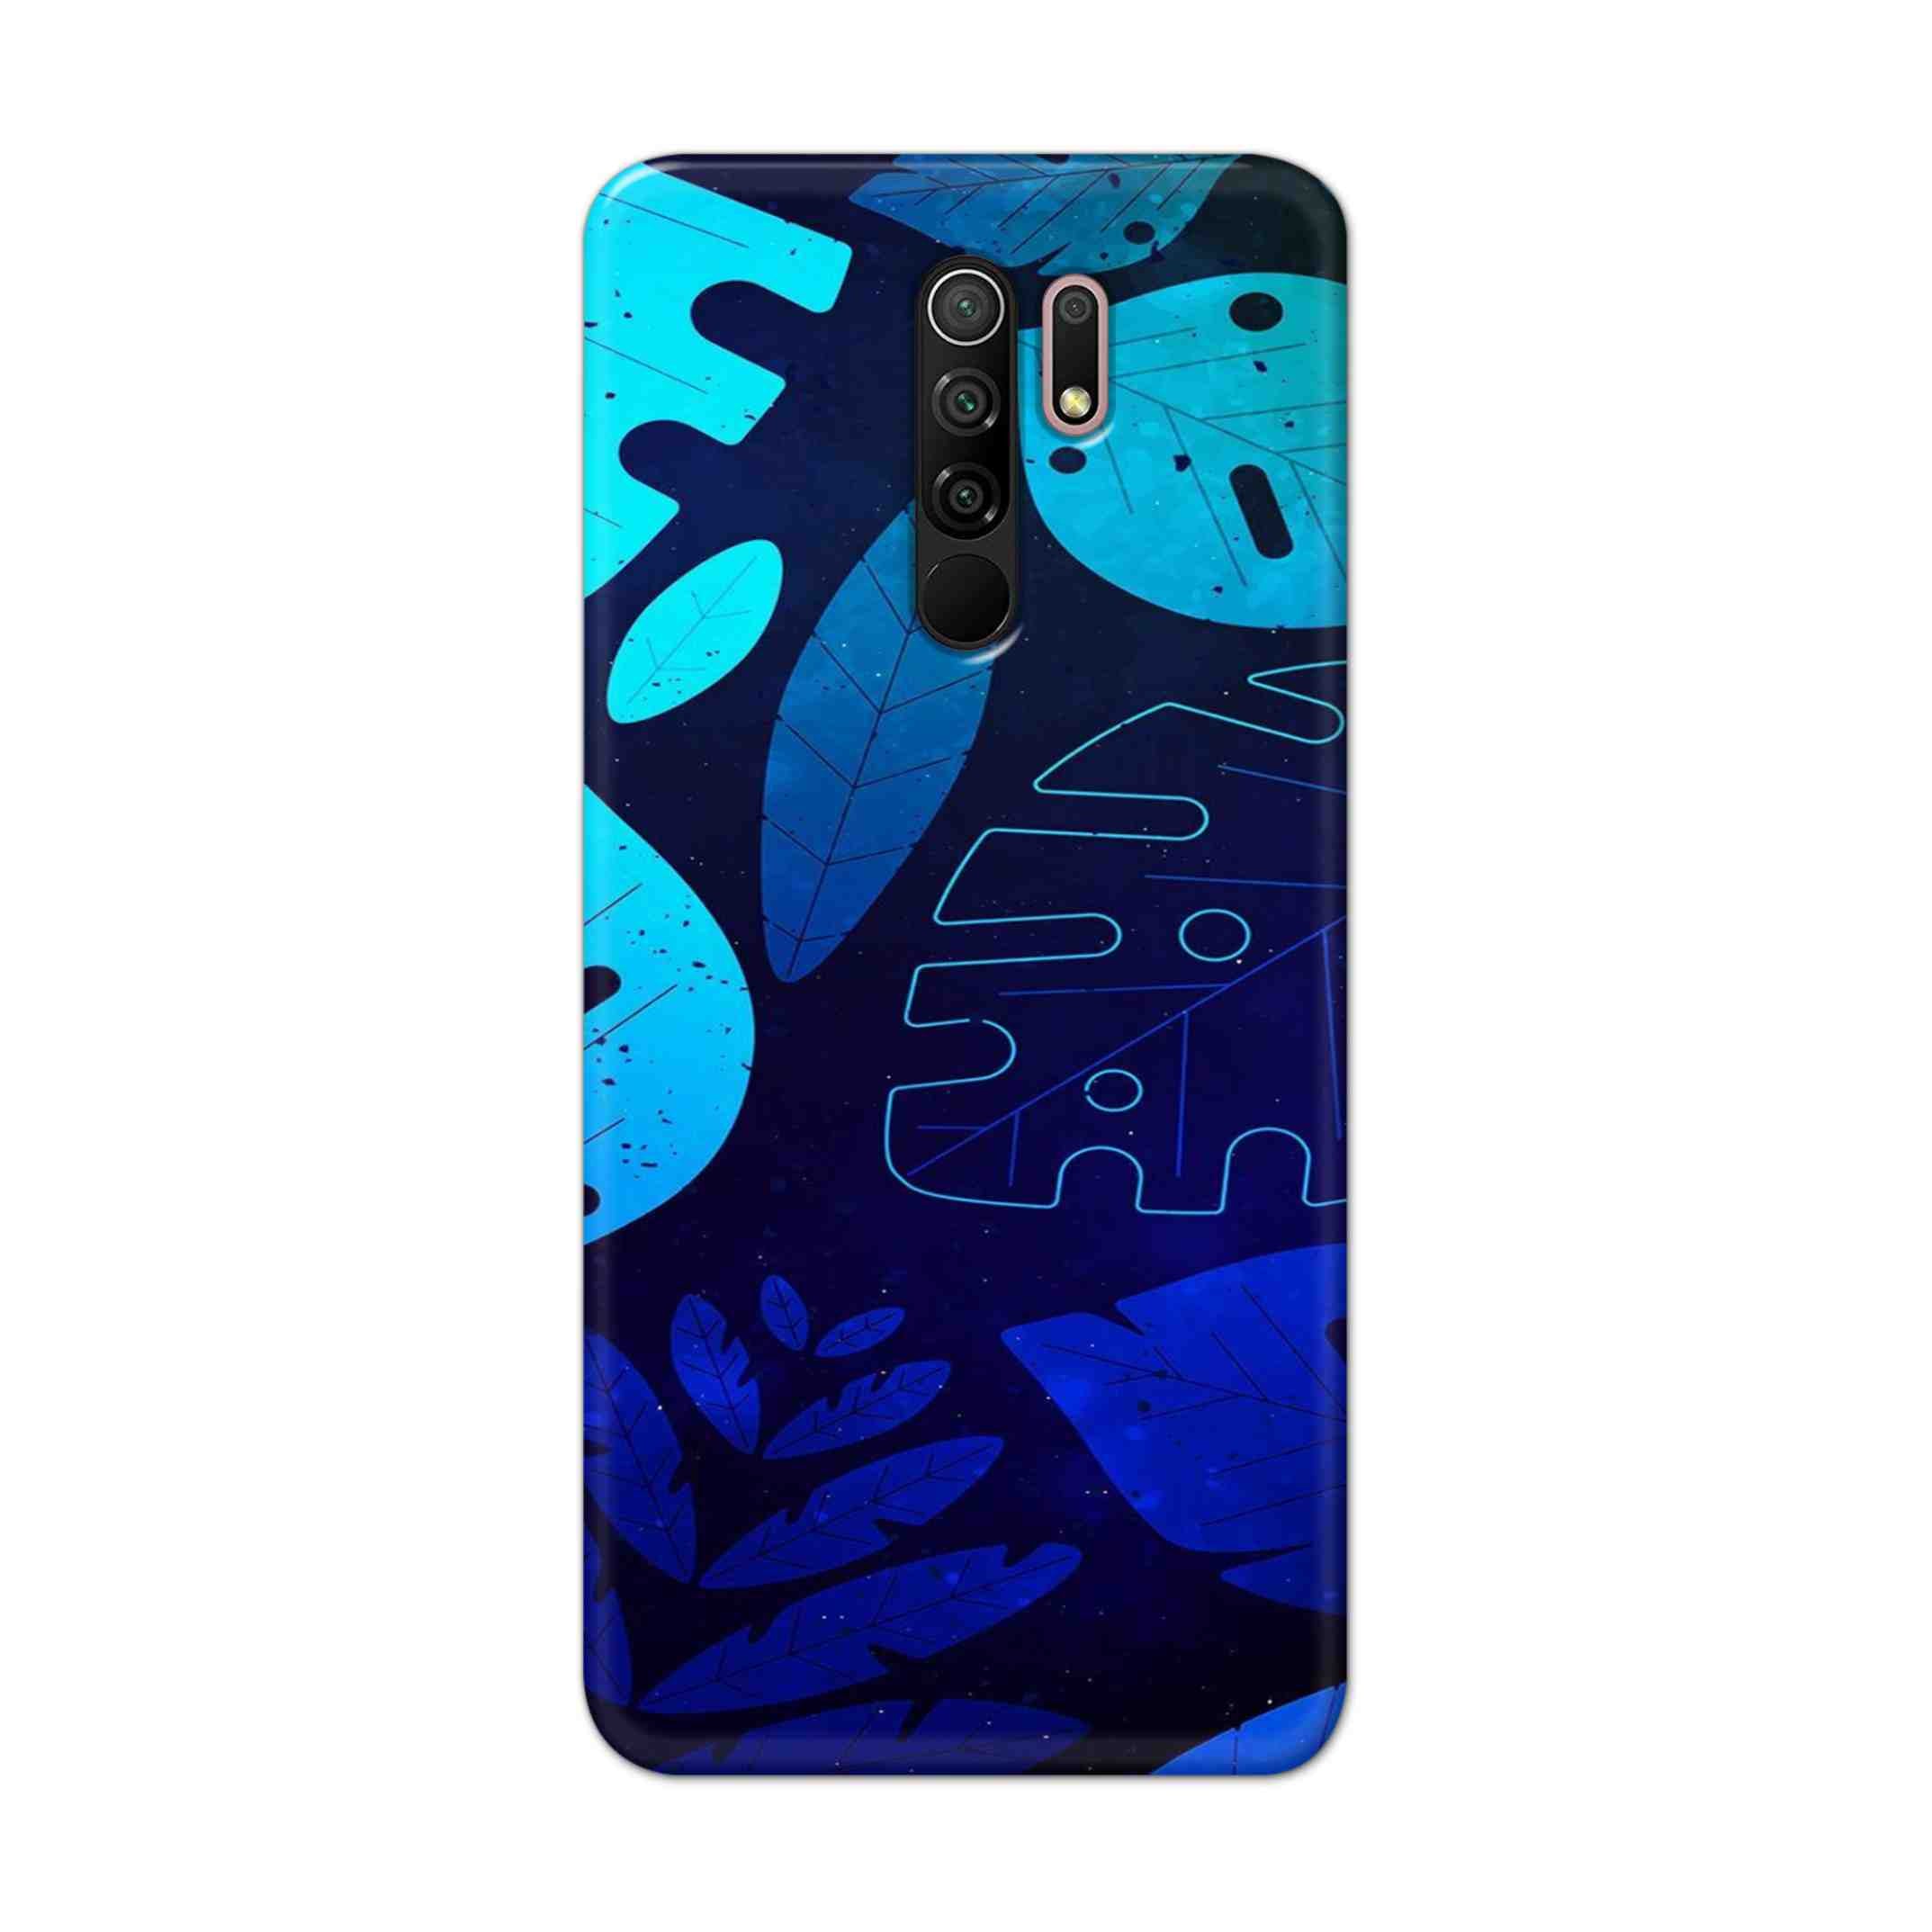 Buy Neon Leaf Hard Back Mobile Phone Case Cover For Xiaomi Redmi 9 Prime Online